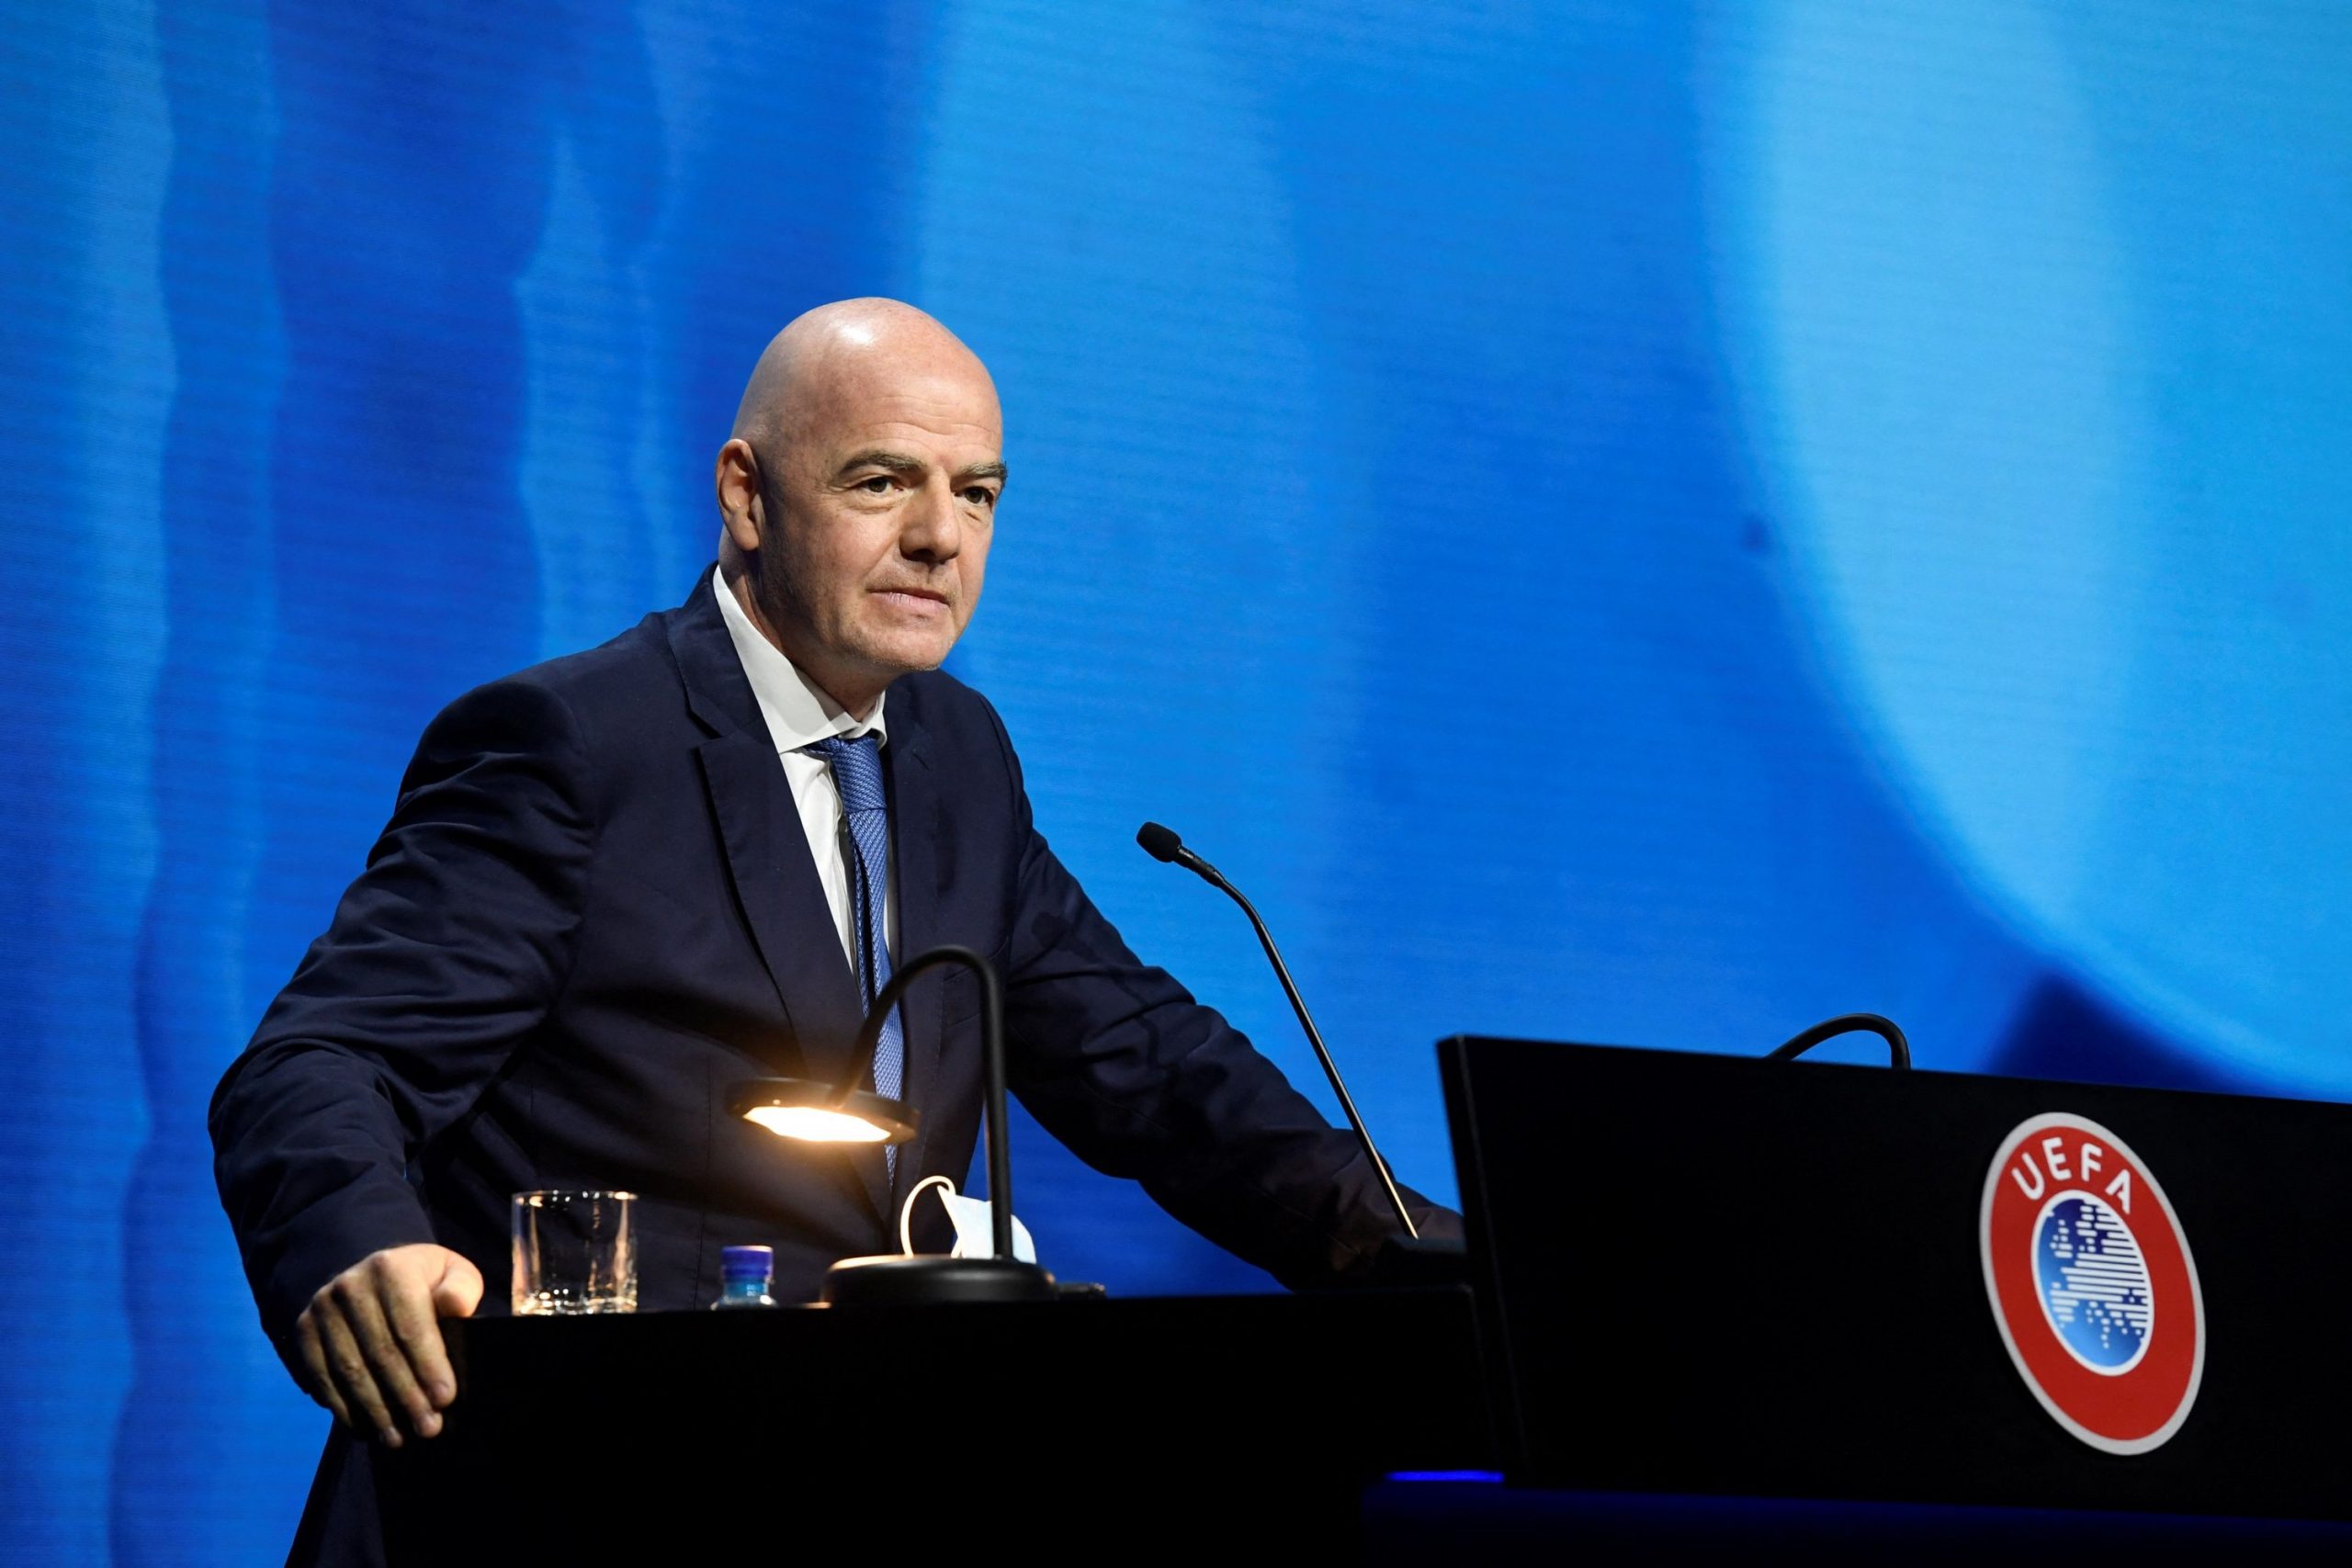 FIFA President Calls on EU Federations to Release Players for World Cup Qualifiers